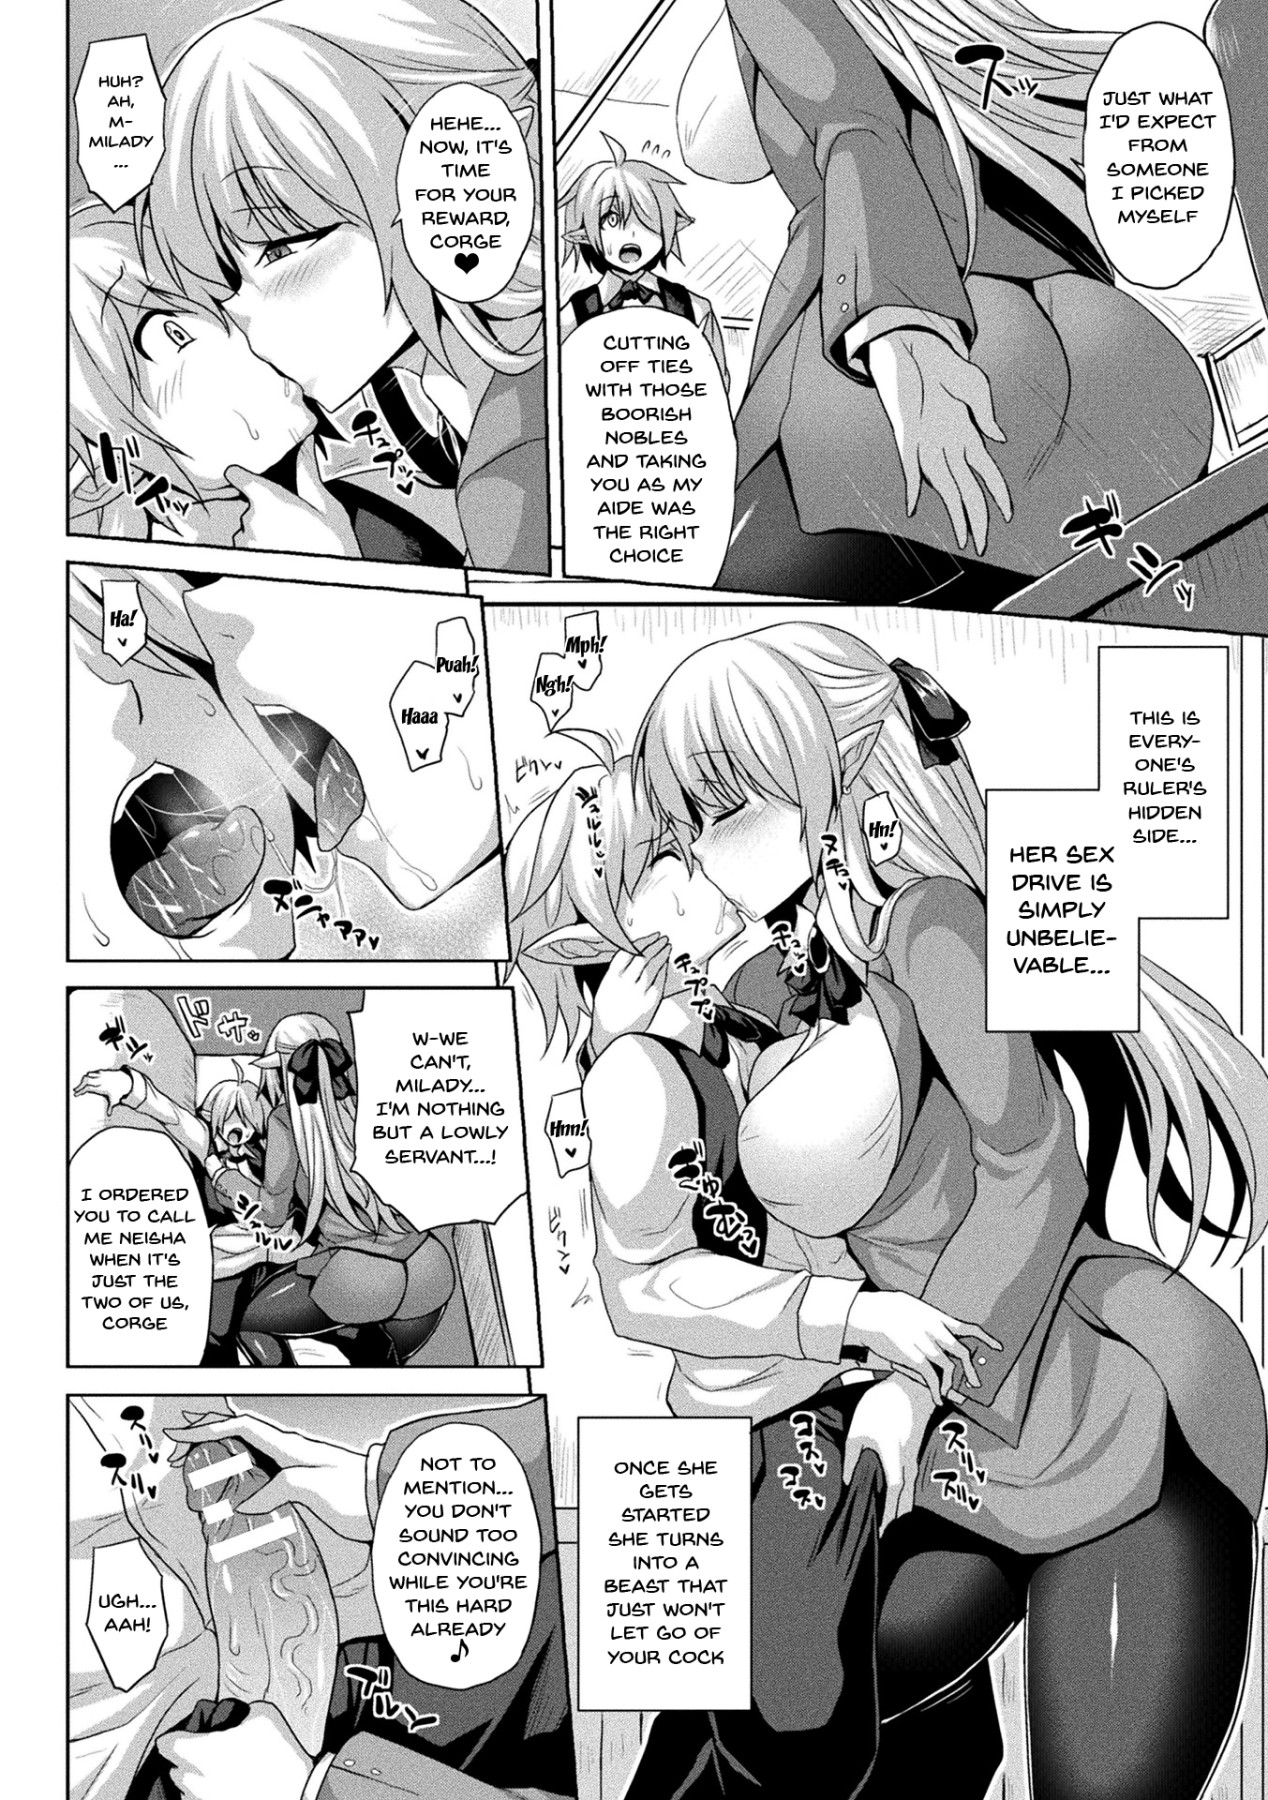 Hentai Manga Comic-The Woman Who's Fallen Into Being a Slut In Defeat-Chapter 6-2